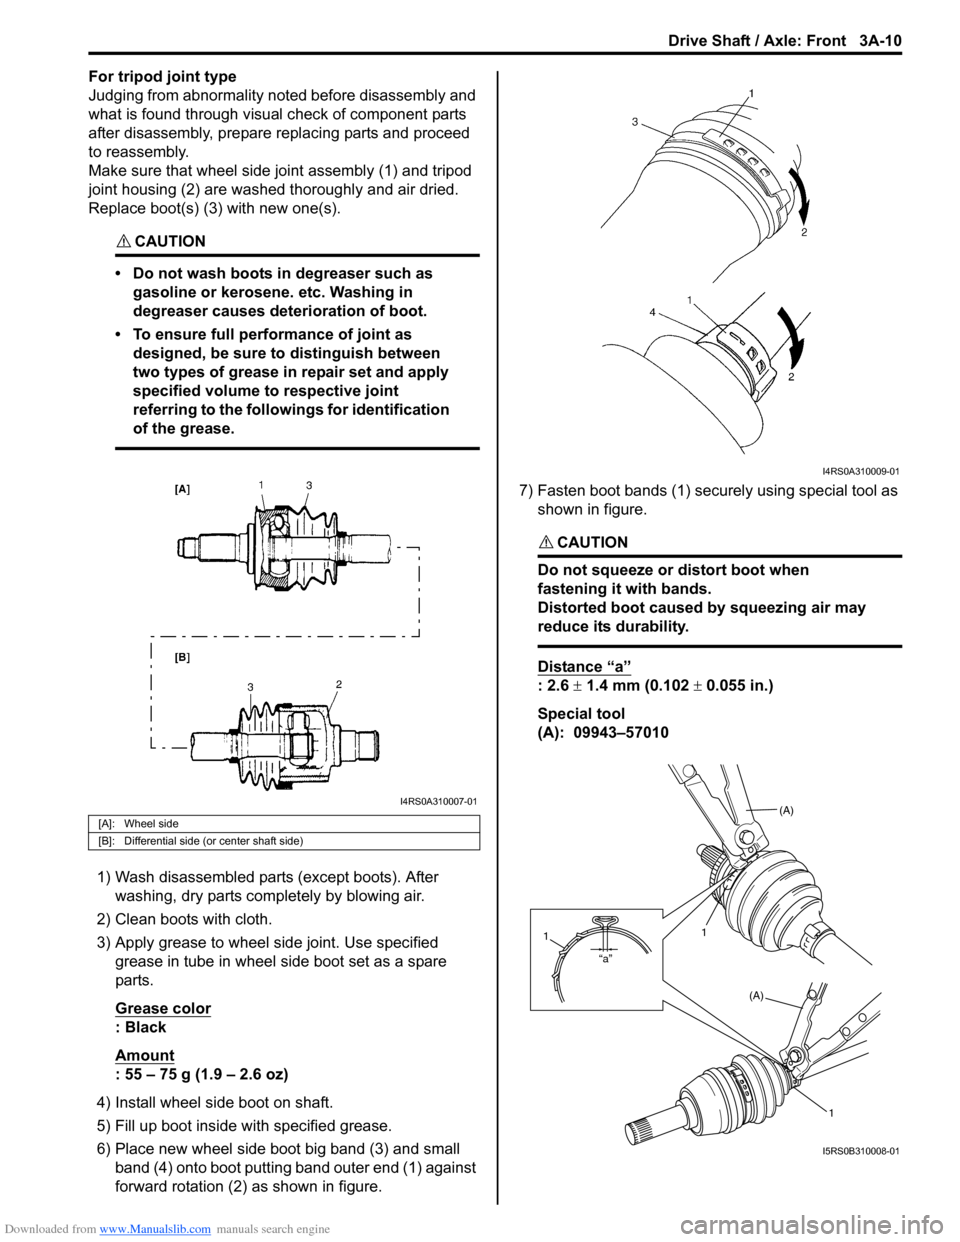 SUZUKI SX4 2006 1.G Service Workshop Manual Downloaded from www.Manualslib.com manuals search engine Drive Shaft / Axle: Front 3A-10
For tripod joint type
Judging from abnormality noted before disassembly and 
what is found through visual check